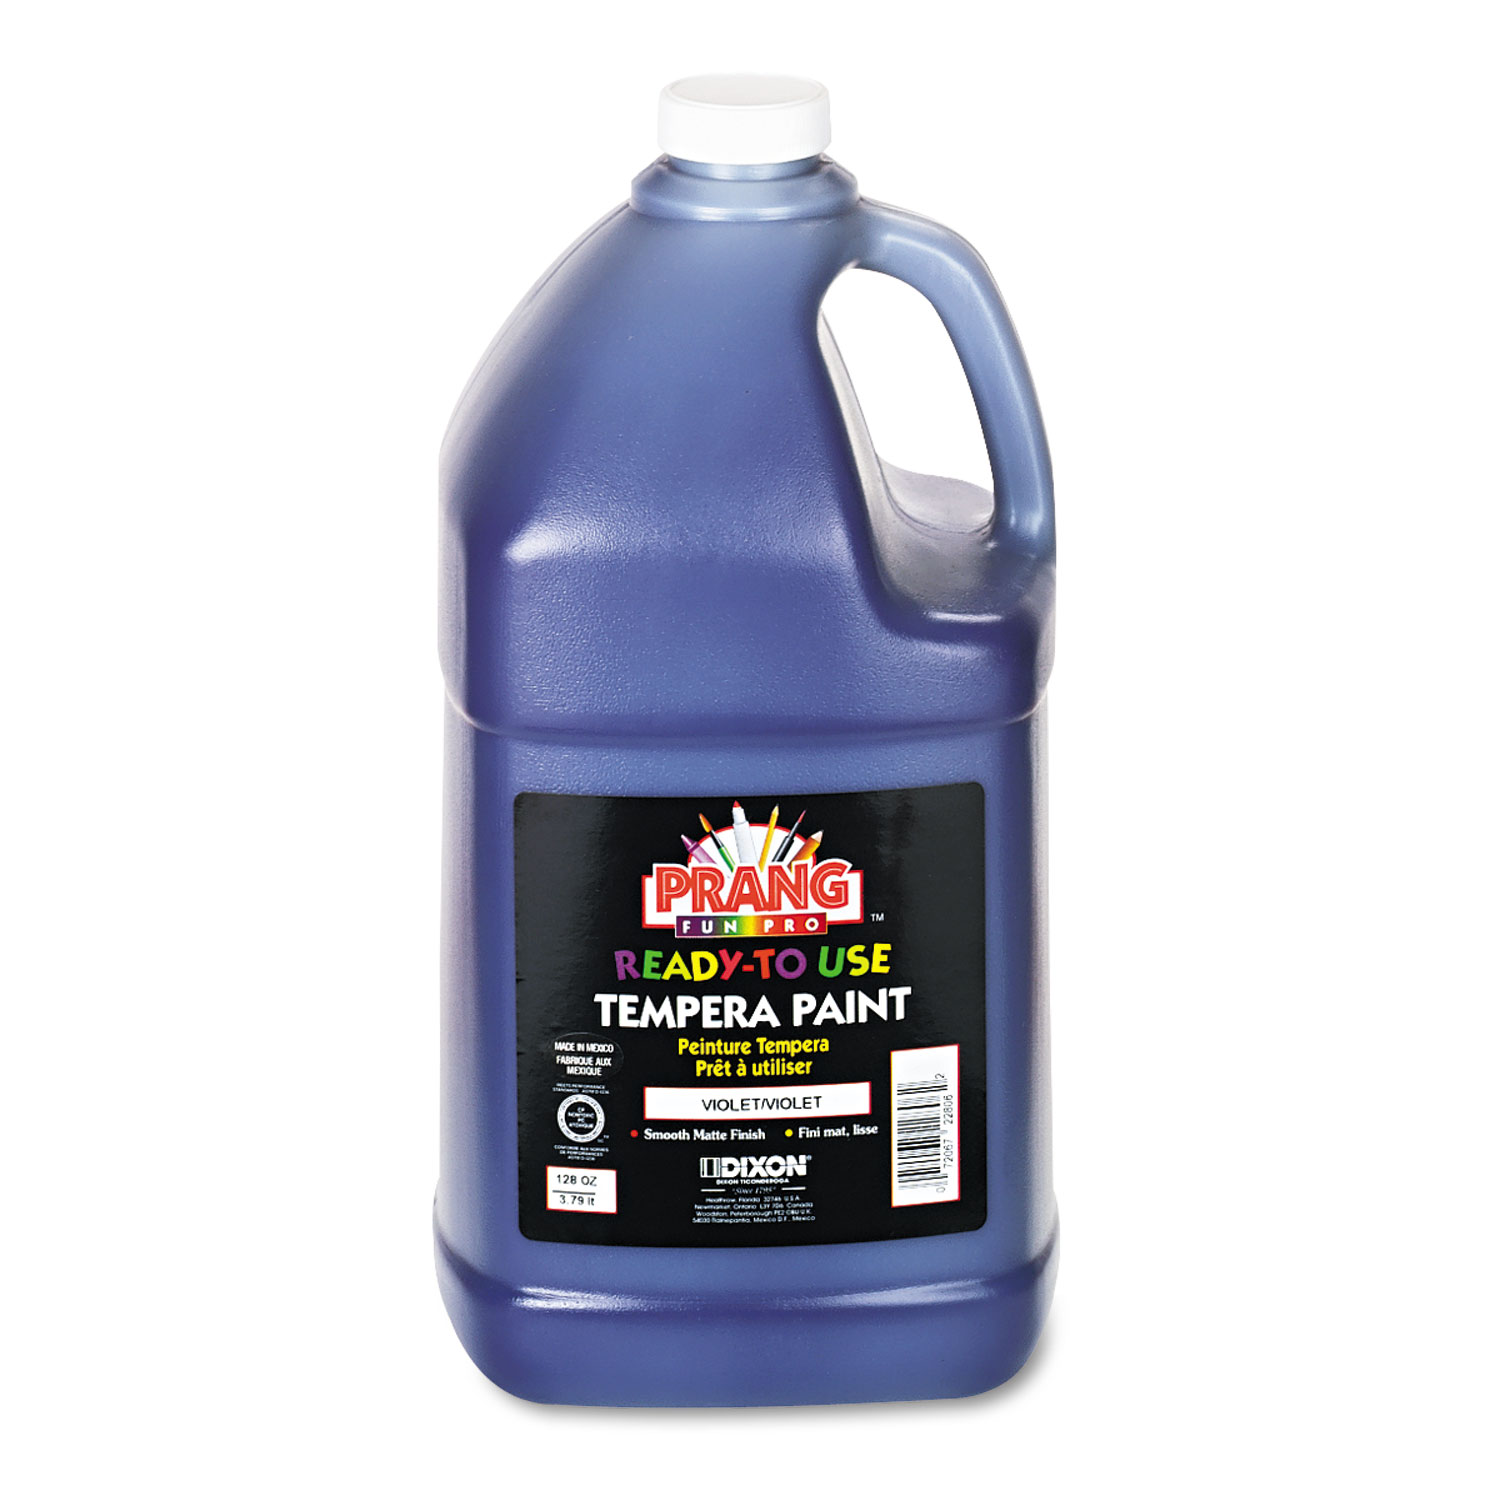 Ready-to-Use Tempera Paint, Violet, 1 gal